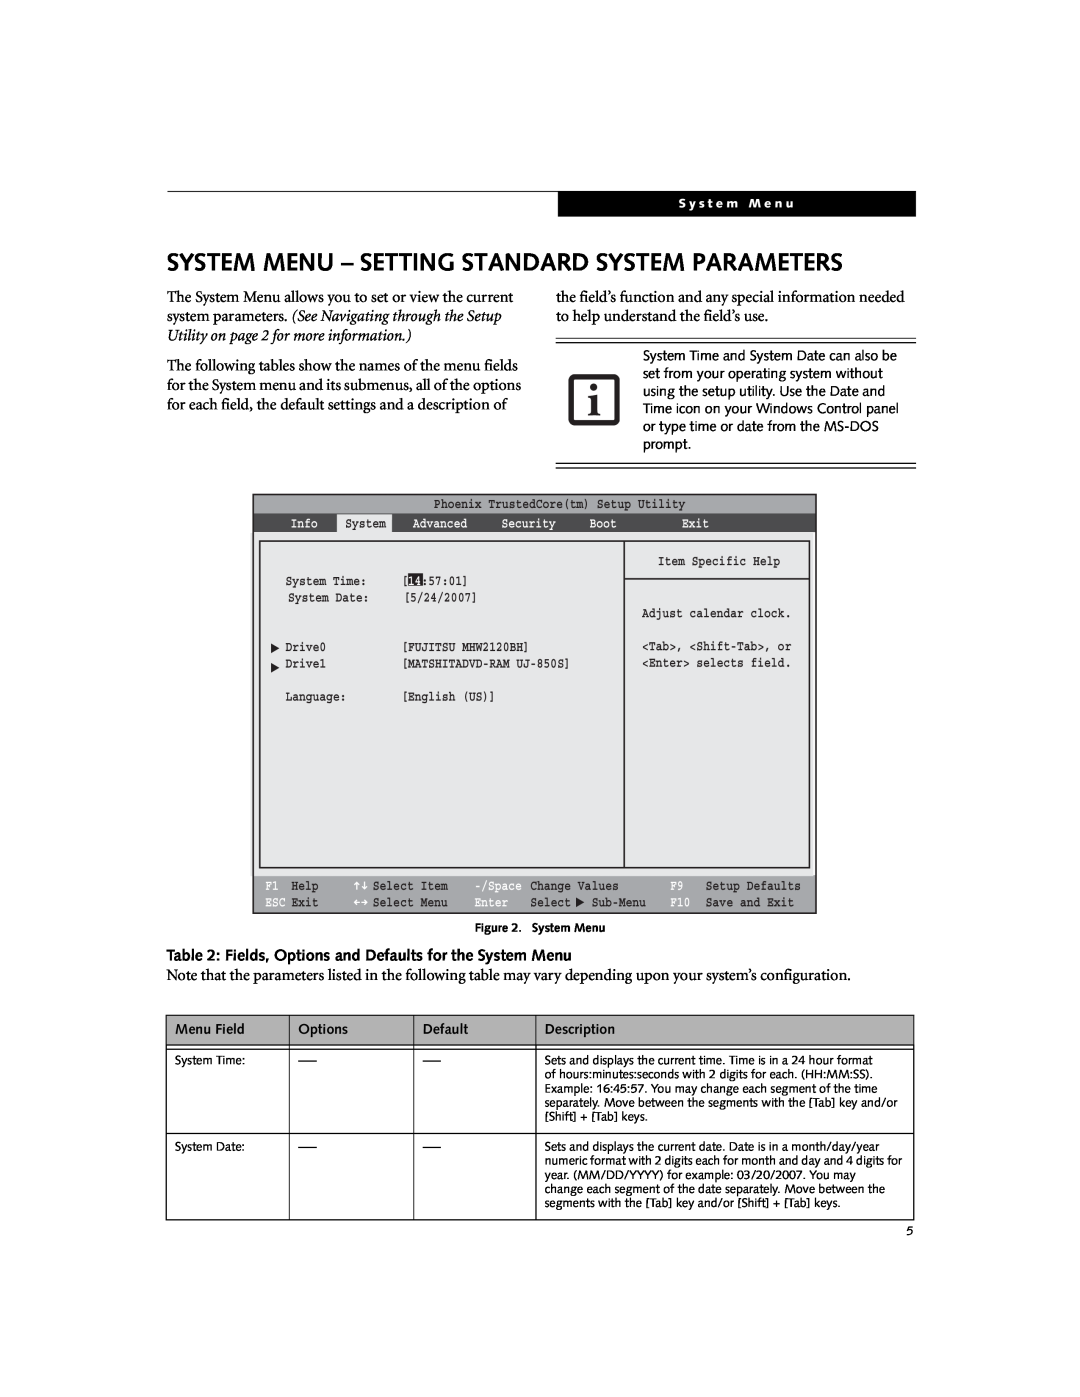 Fujitsu E8410 manual System Menu - Setting Standard System Parameters, Fields, Options and Defaults for the System Menu 